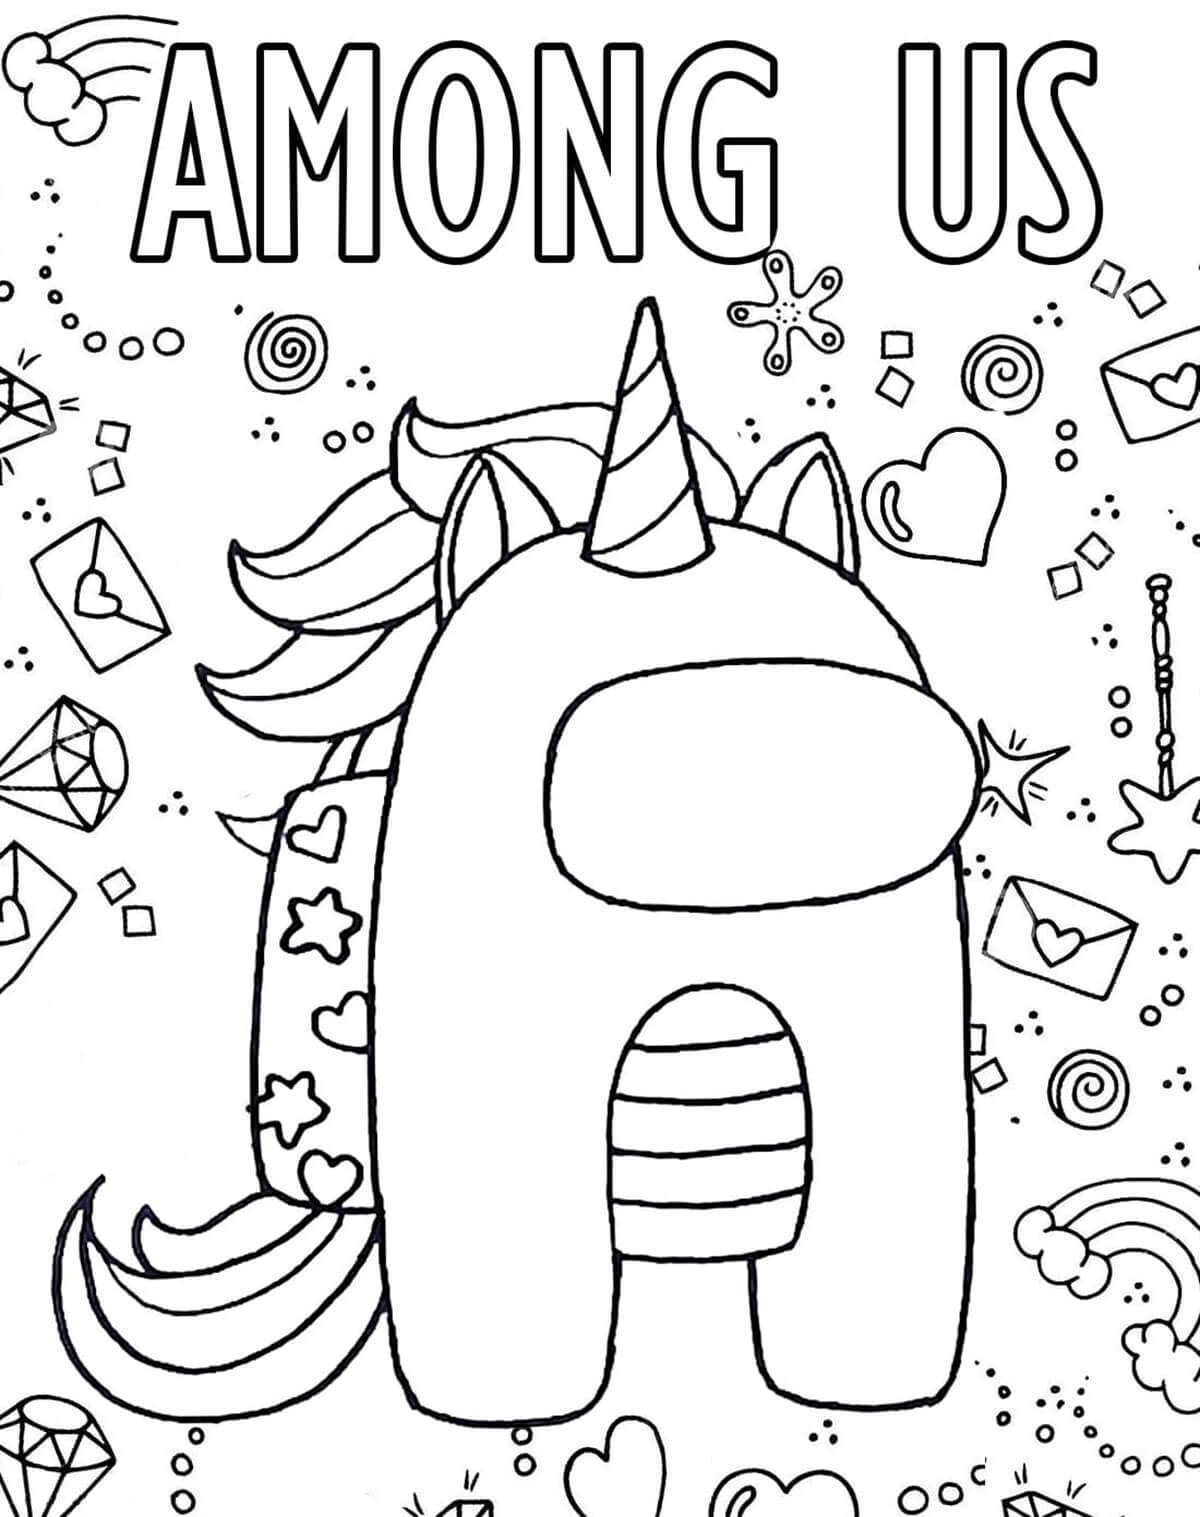 Roblox Unicorn Avatar Coloring Page, coloringwithkids.com